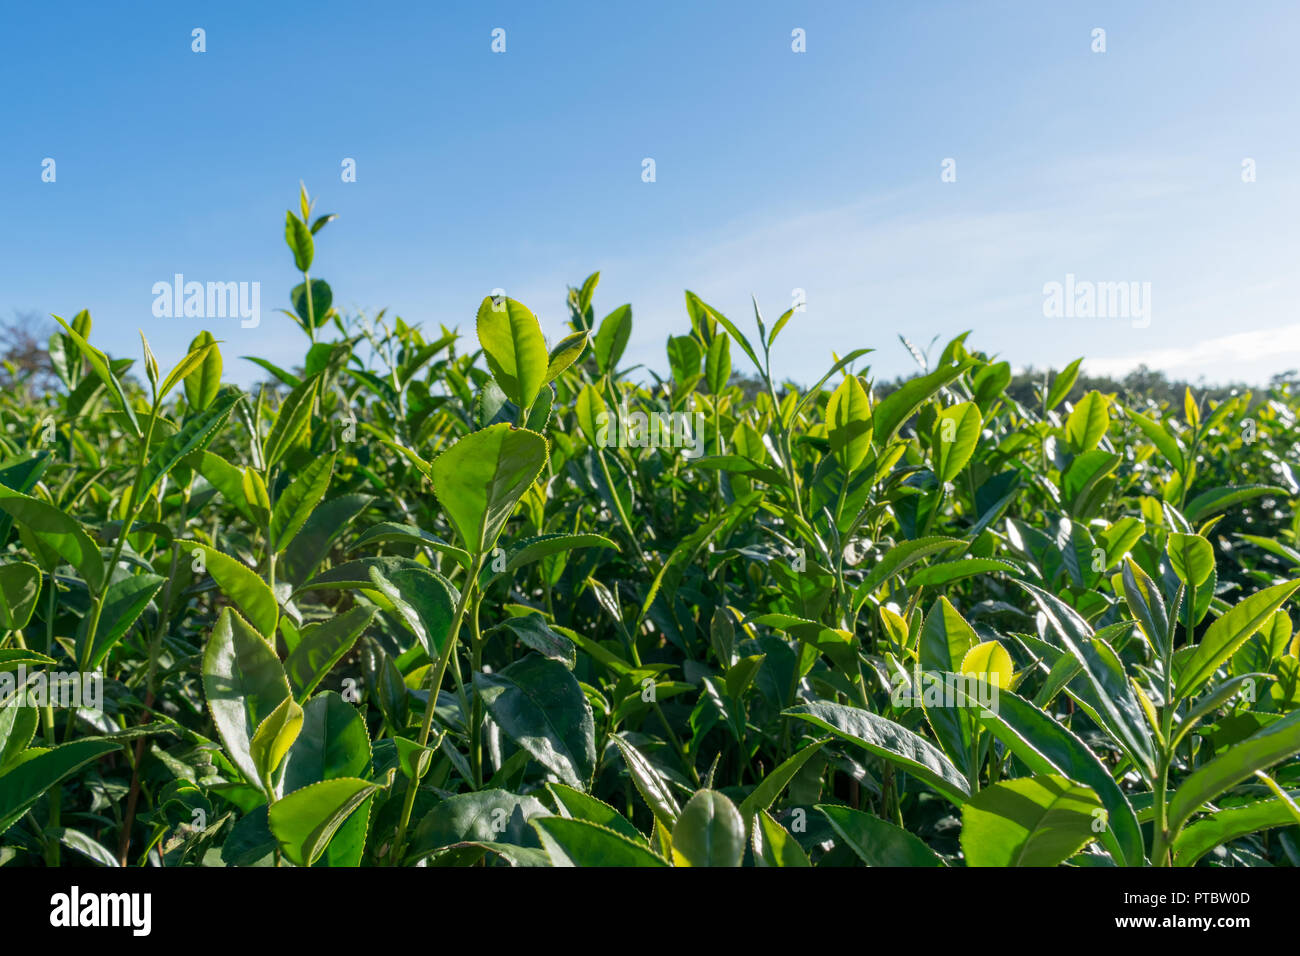 Unique background with fresh green tea leaves, tea hill, lonely tree and blue sky. Picture use for tea production, advertising, design, marketing, pac Stock Photo